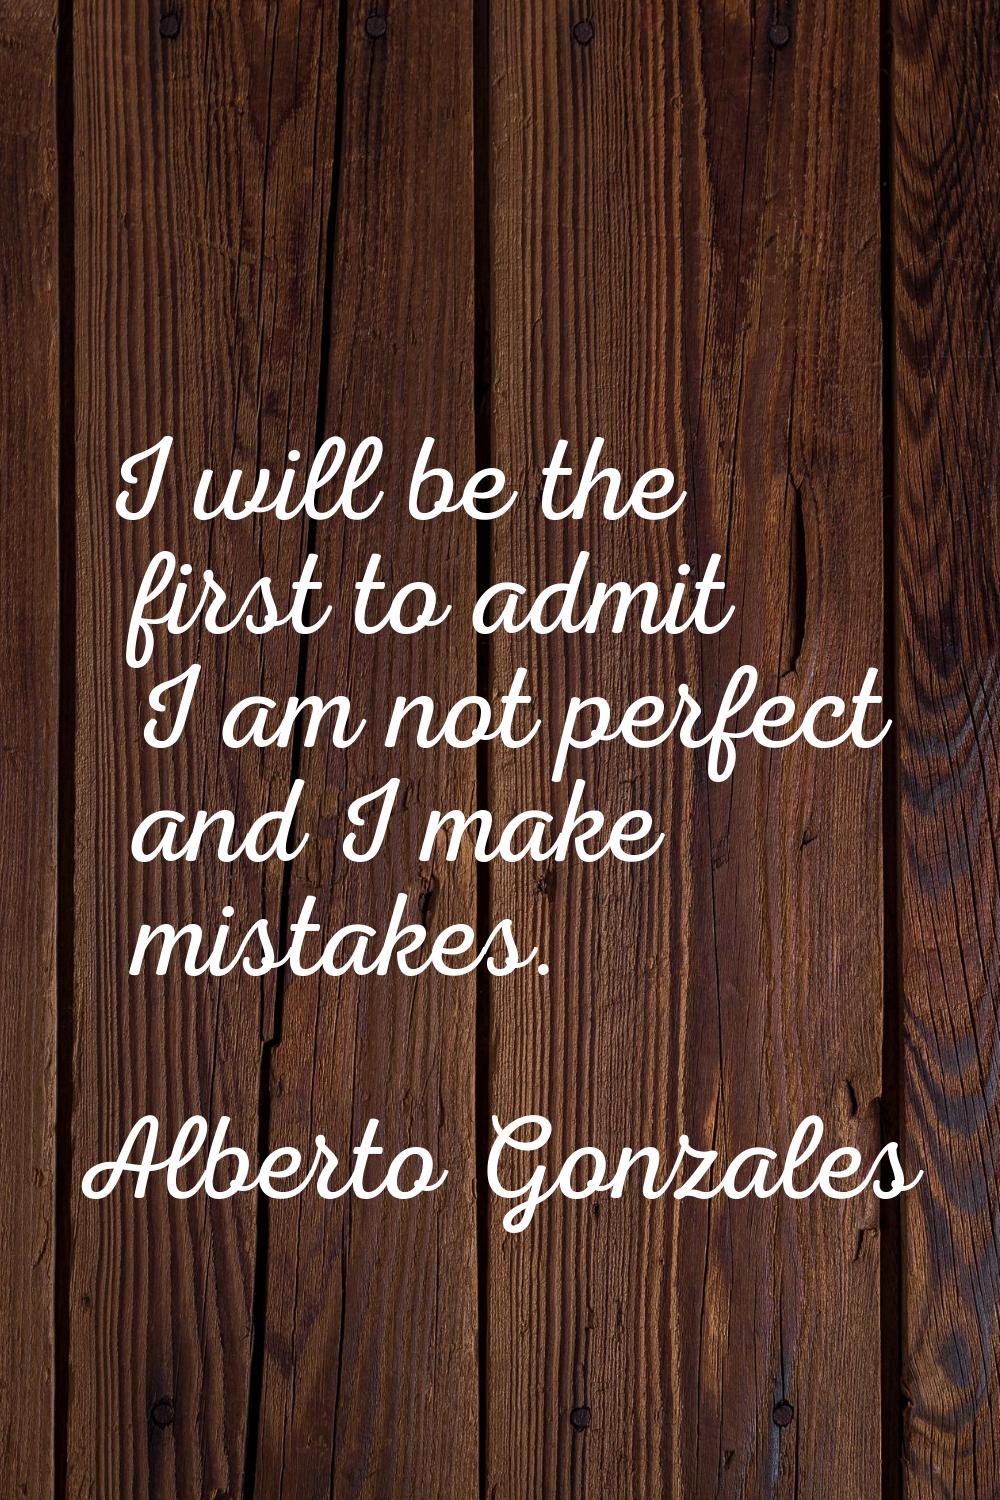 I will be the first to admit I am not perfect and I make mistakes.